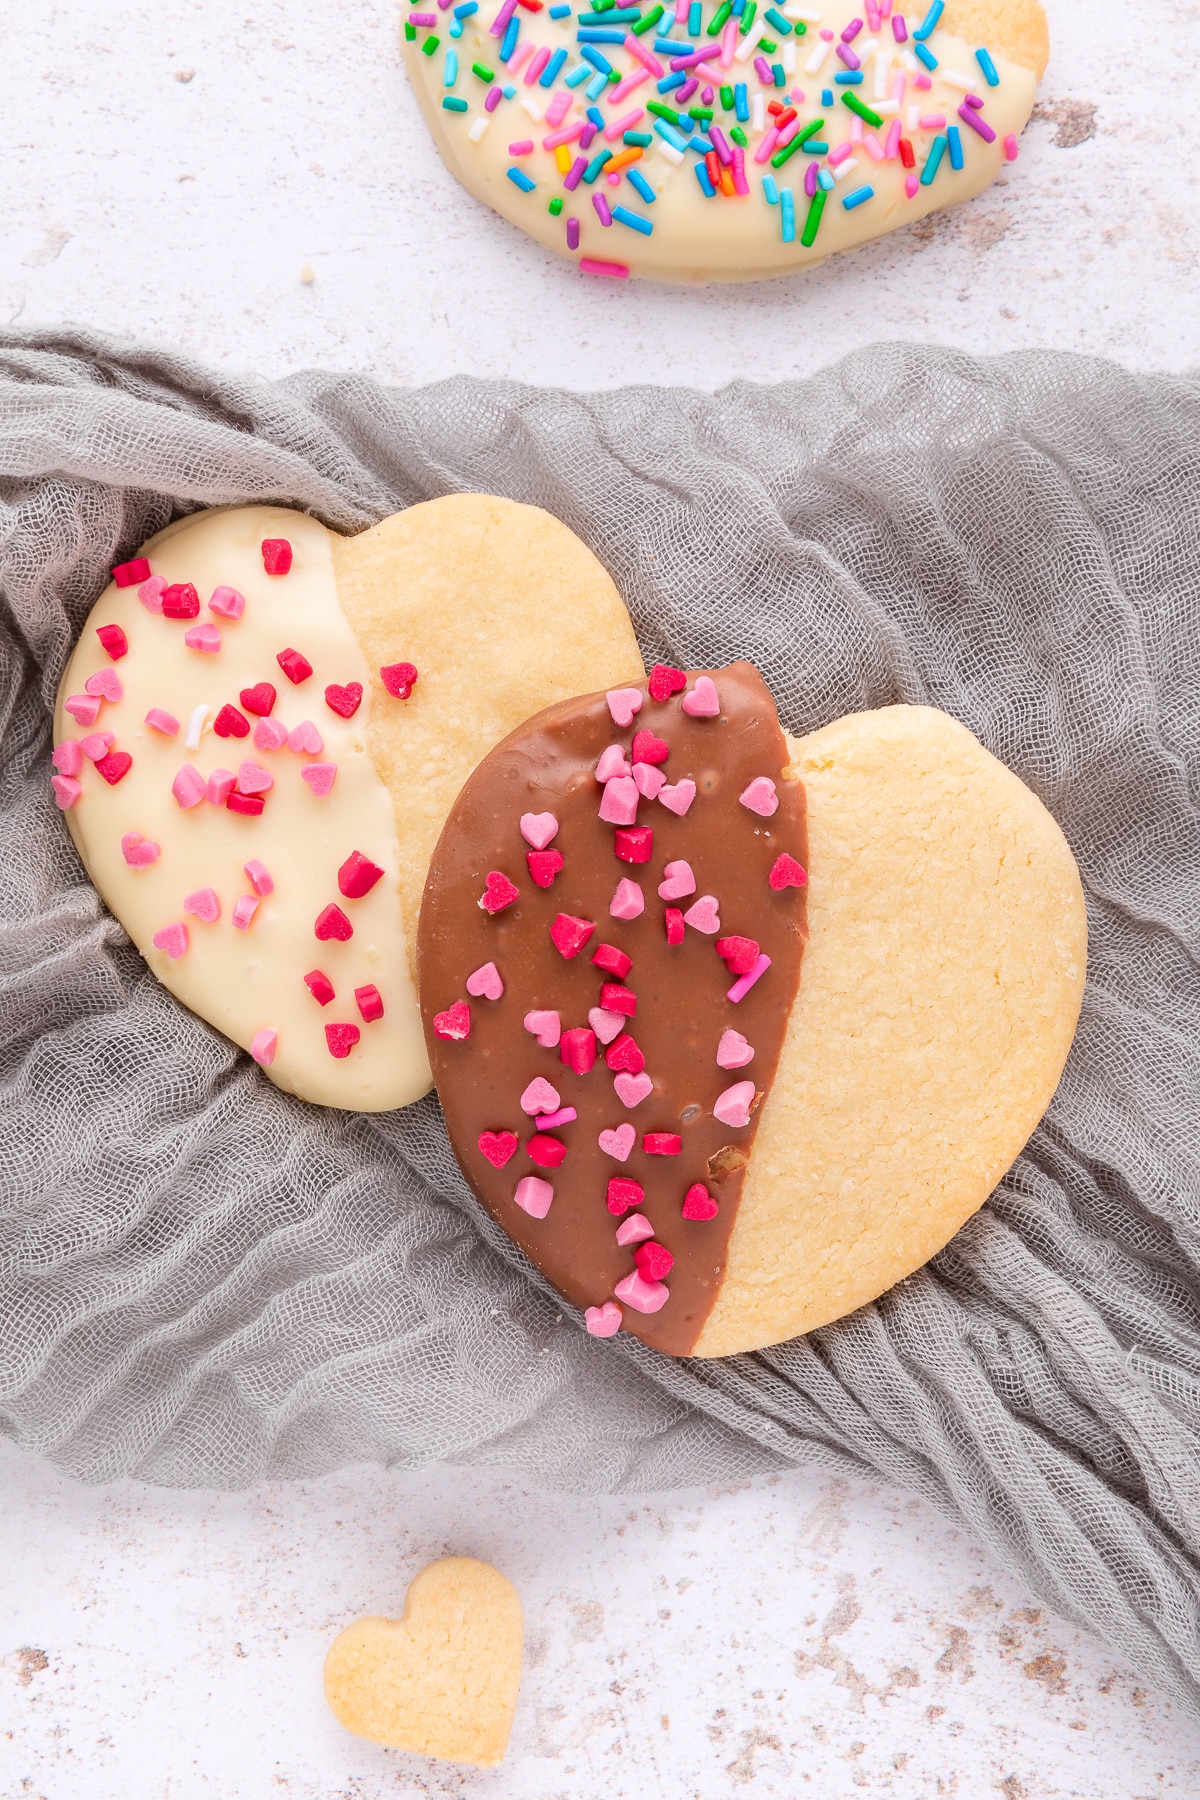 heart shaped cookies half covered in chocolate and sprinkles.